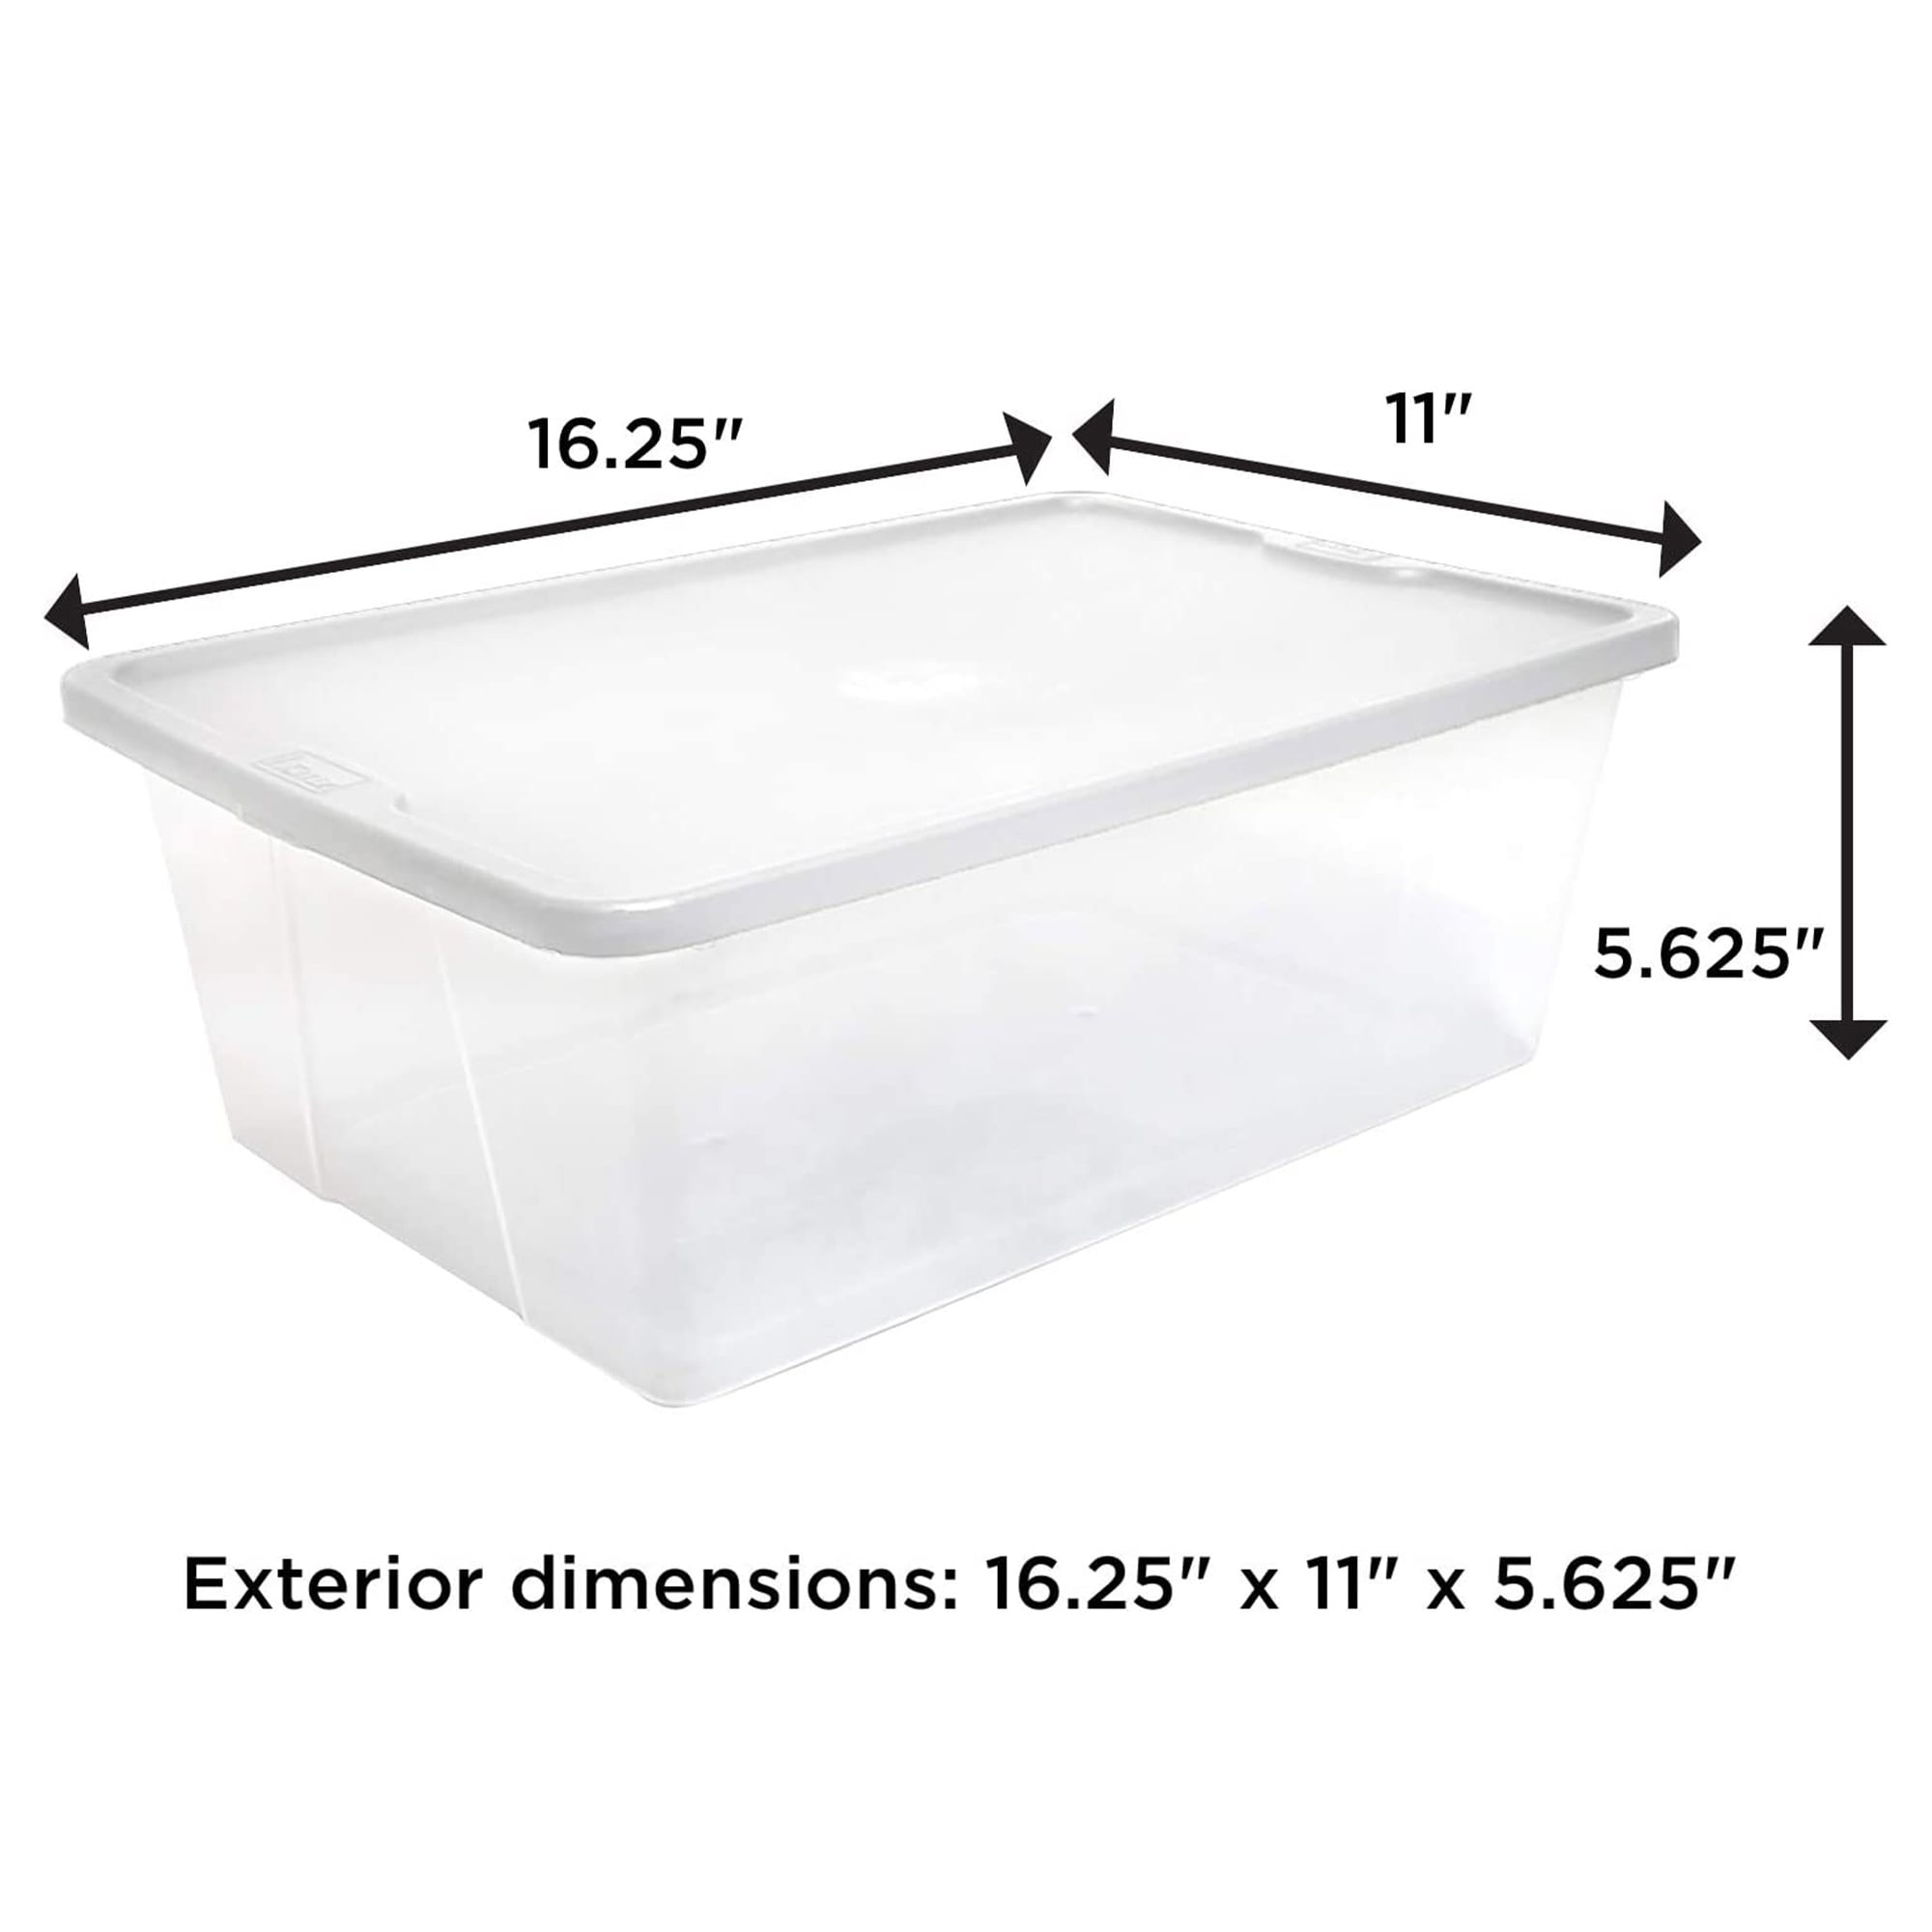 https://ak1.ostkcdn.com/images/products/is/images/direct/bf99a59af63a4b45cbf4417db5915723c18df893/Homz-12-Qt-Snaplock-Clear-Plastic-Storage-Container-Bin-with-Secure-Lid-%288-Pack%29.jpg